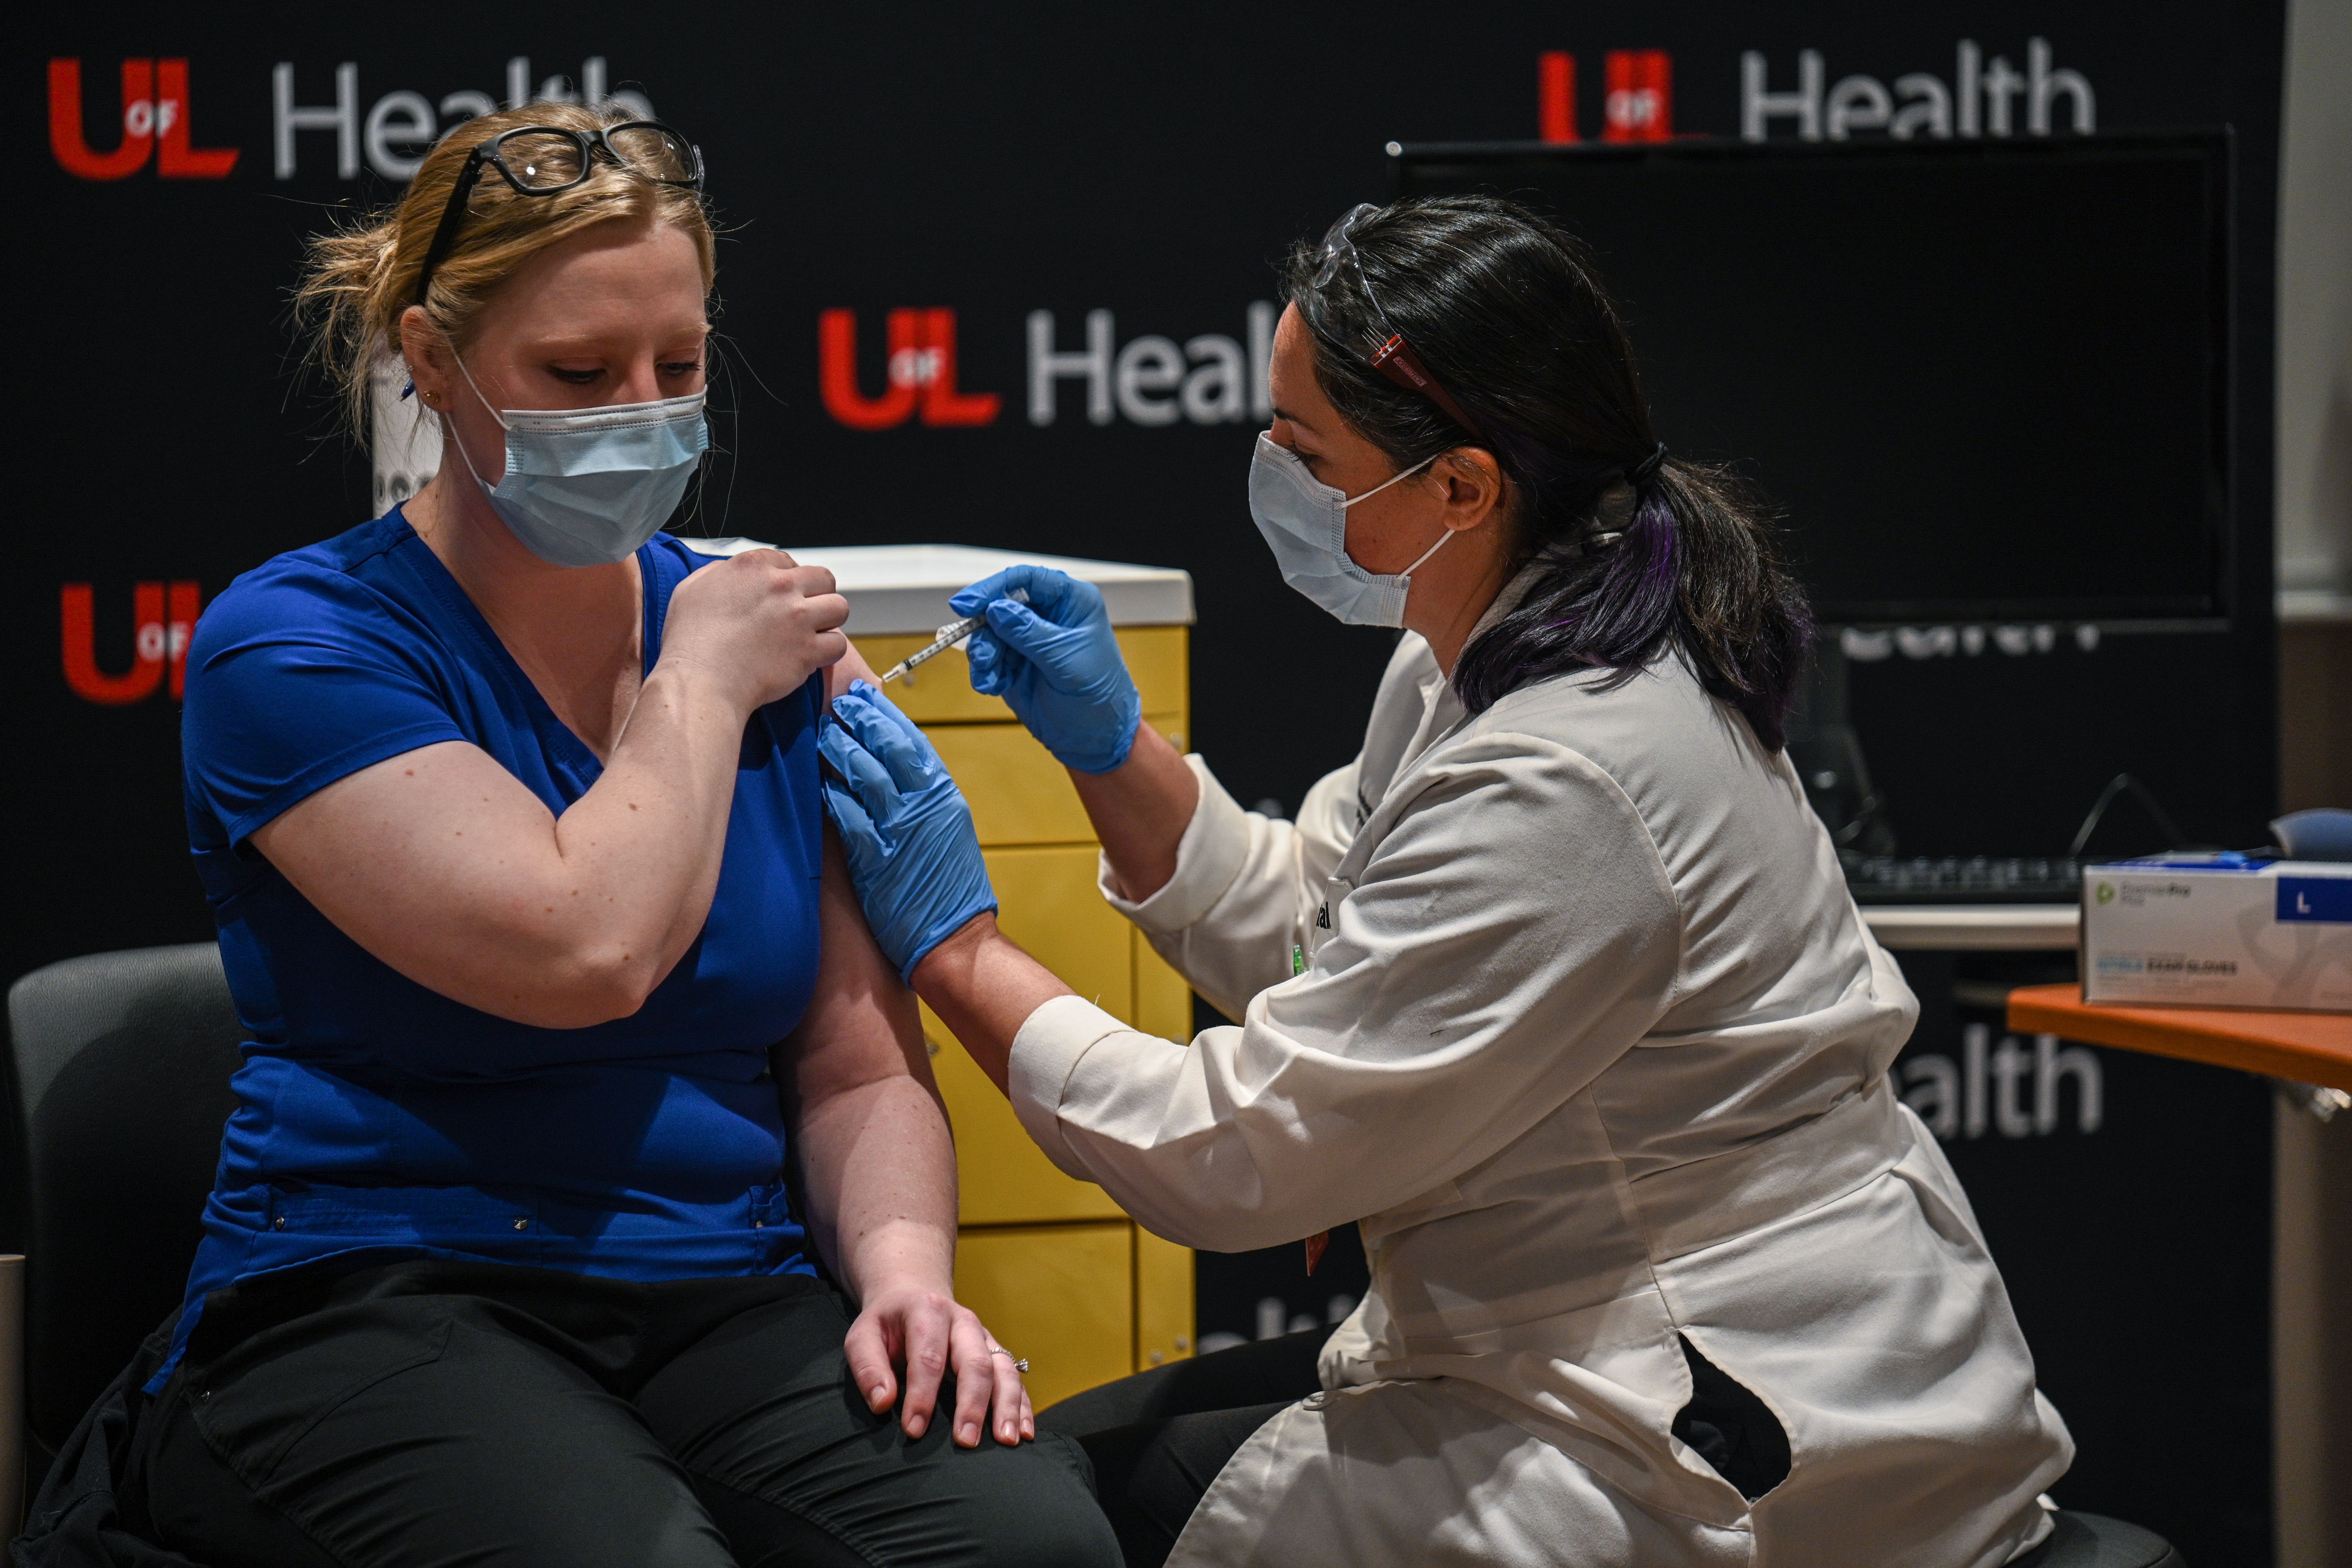 Beth Sum, RN, receives a COVID-19 on Monday in Louisville, Kentucky. Photo: Jon Cherry/Getty Images)